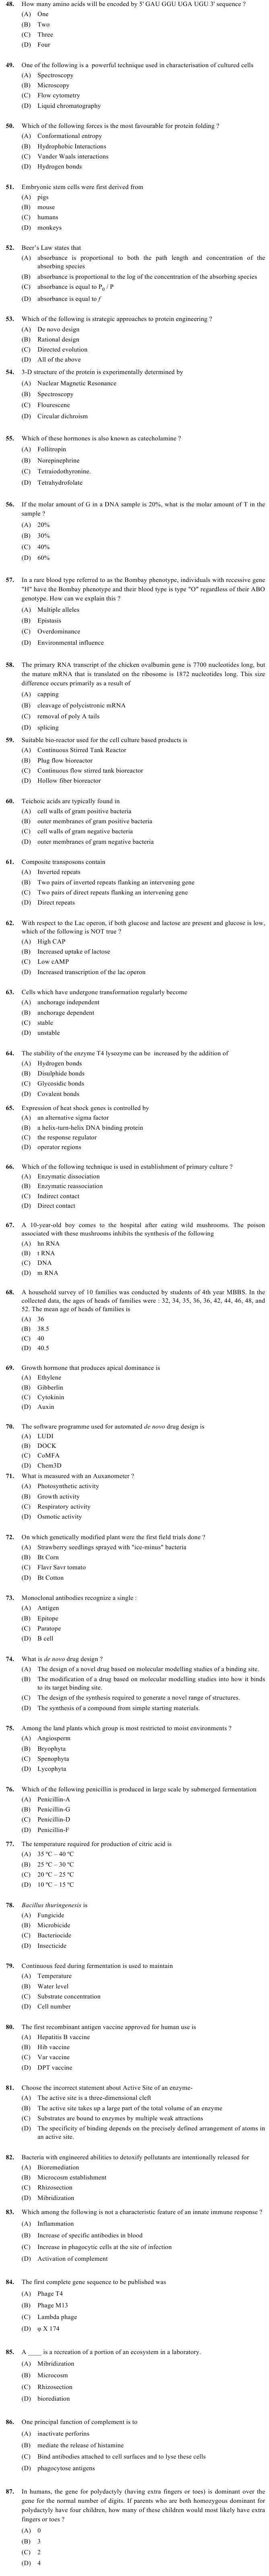 OJEE 2013 Question Paper for PGAT Bio technology